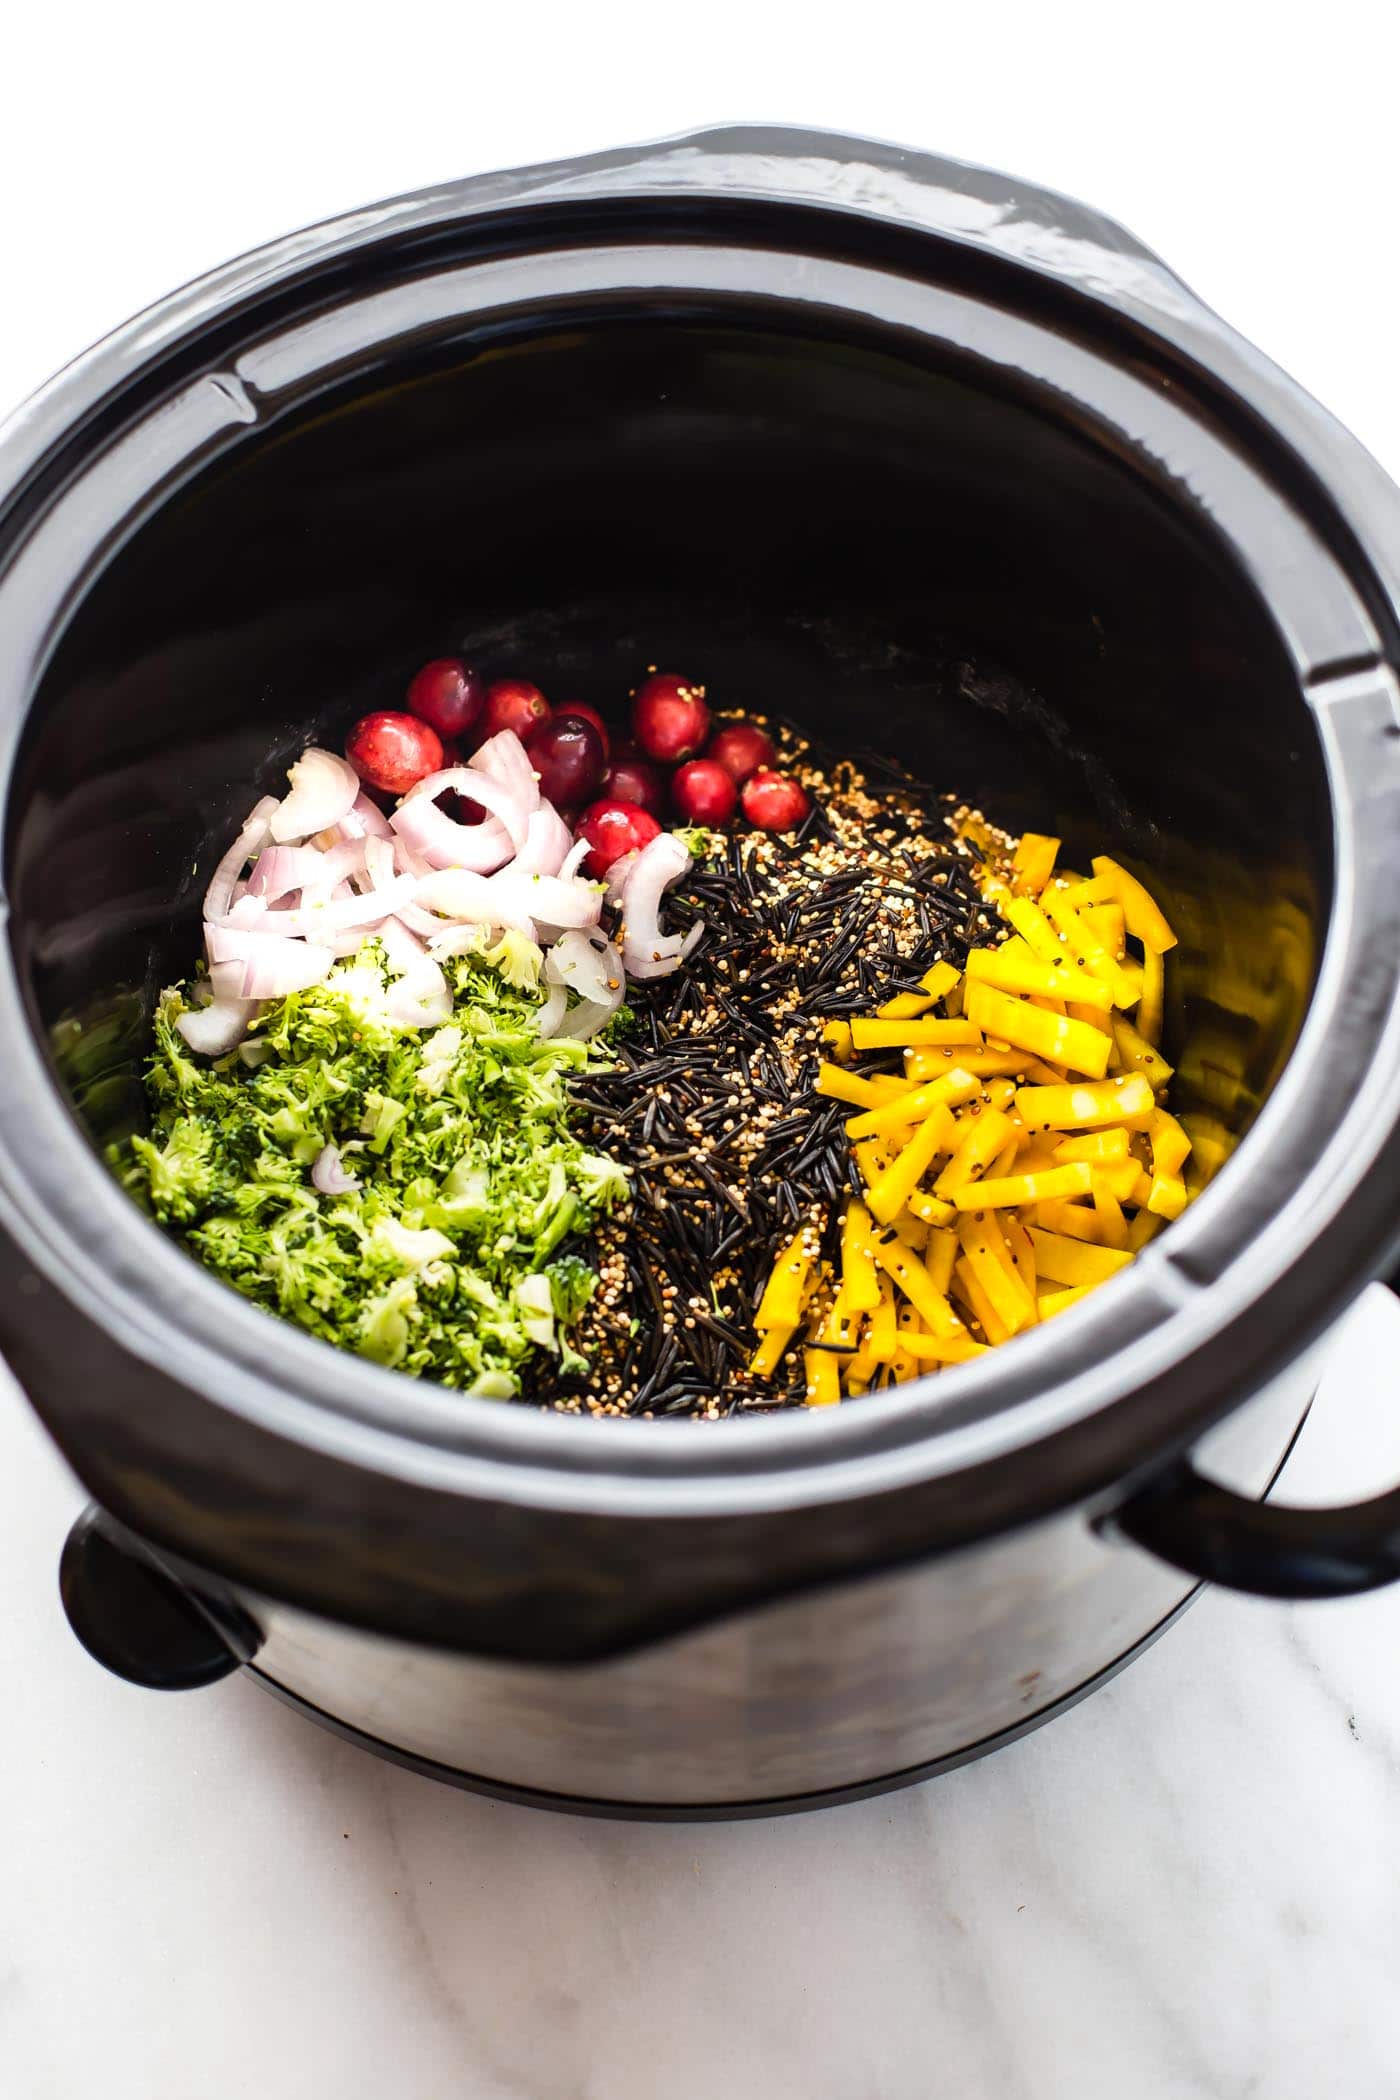 slow cooker filled with uncooked vegetables and wild rice